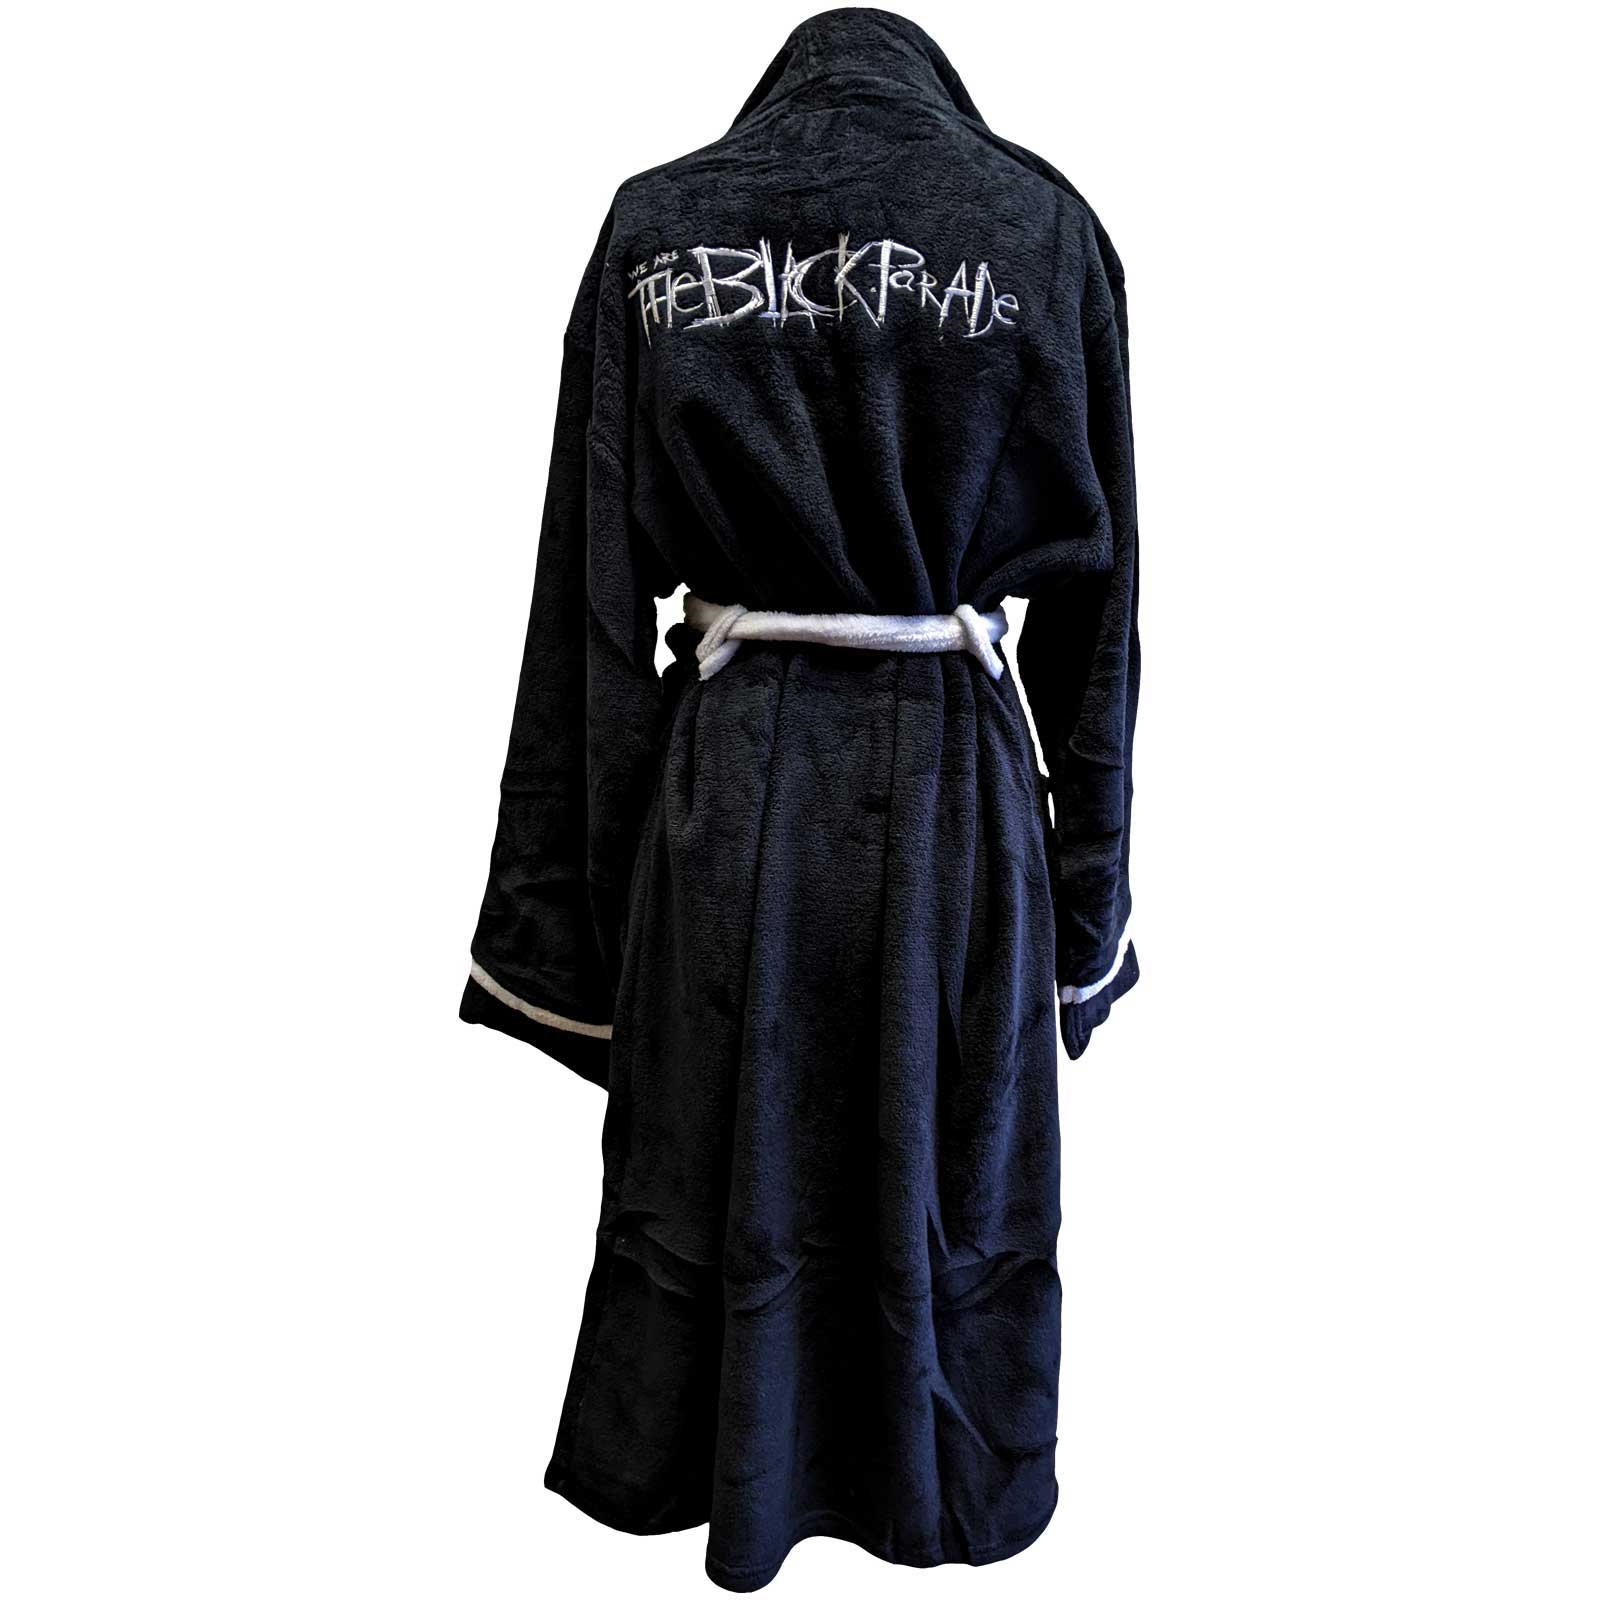 My Chemical Romance Bathrobe - The Black Parade Design - Official Licensed Music Design - Worldwide Shipping